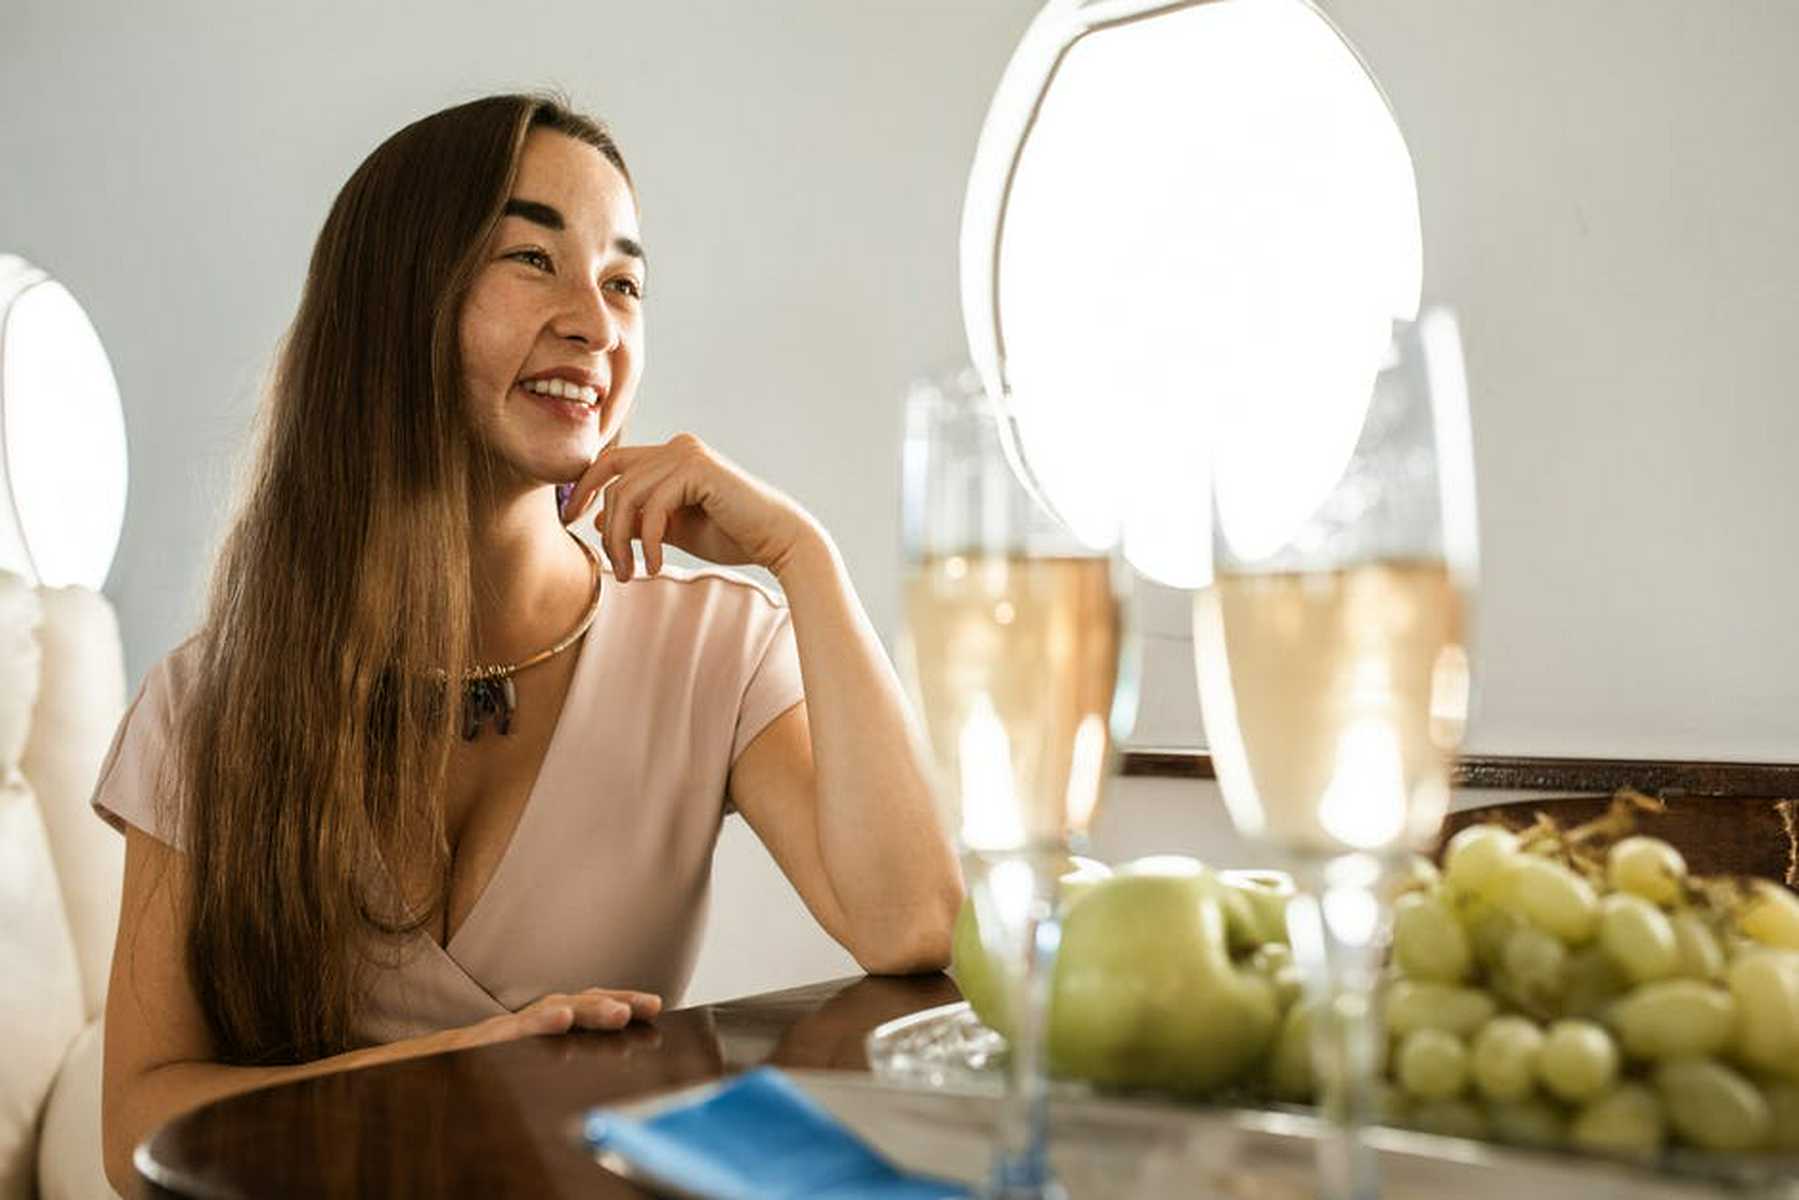 A saleswoman eating champagne and grapes in a private jet